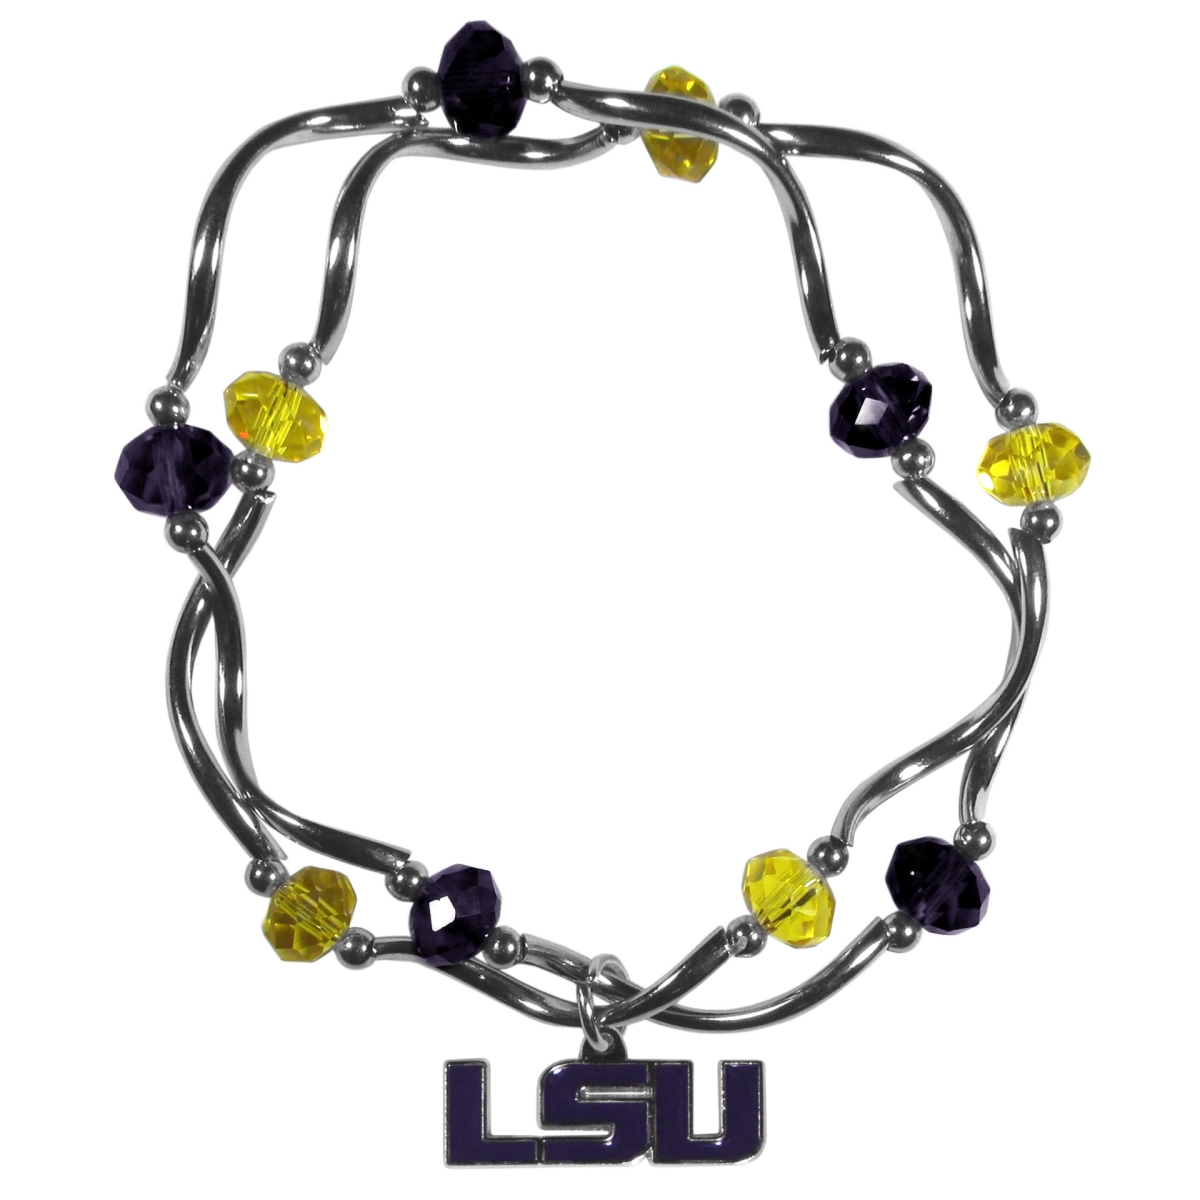 Picture of Siskiyou CCYB43 Female NCAA LSU Tigers Crystal Bead Bracelet - One Size